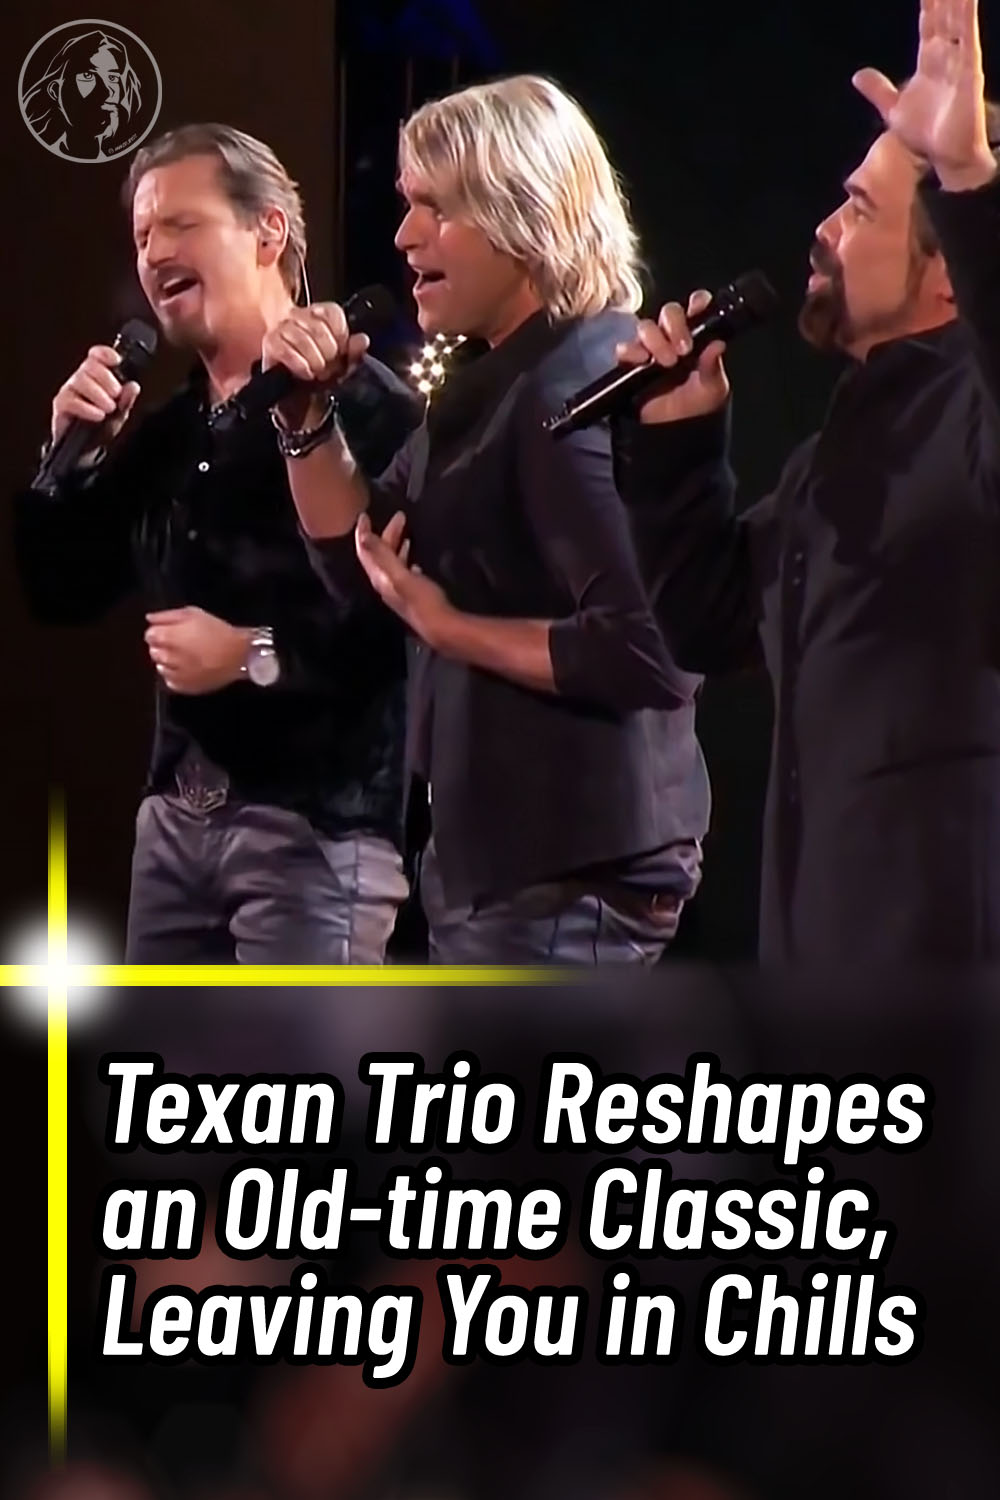 Texan Trio Reshapes an Old-time Classic, Leaving You in Chills